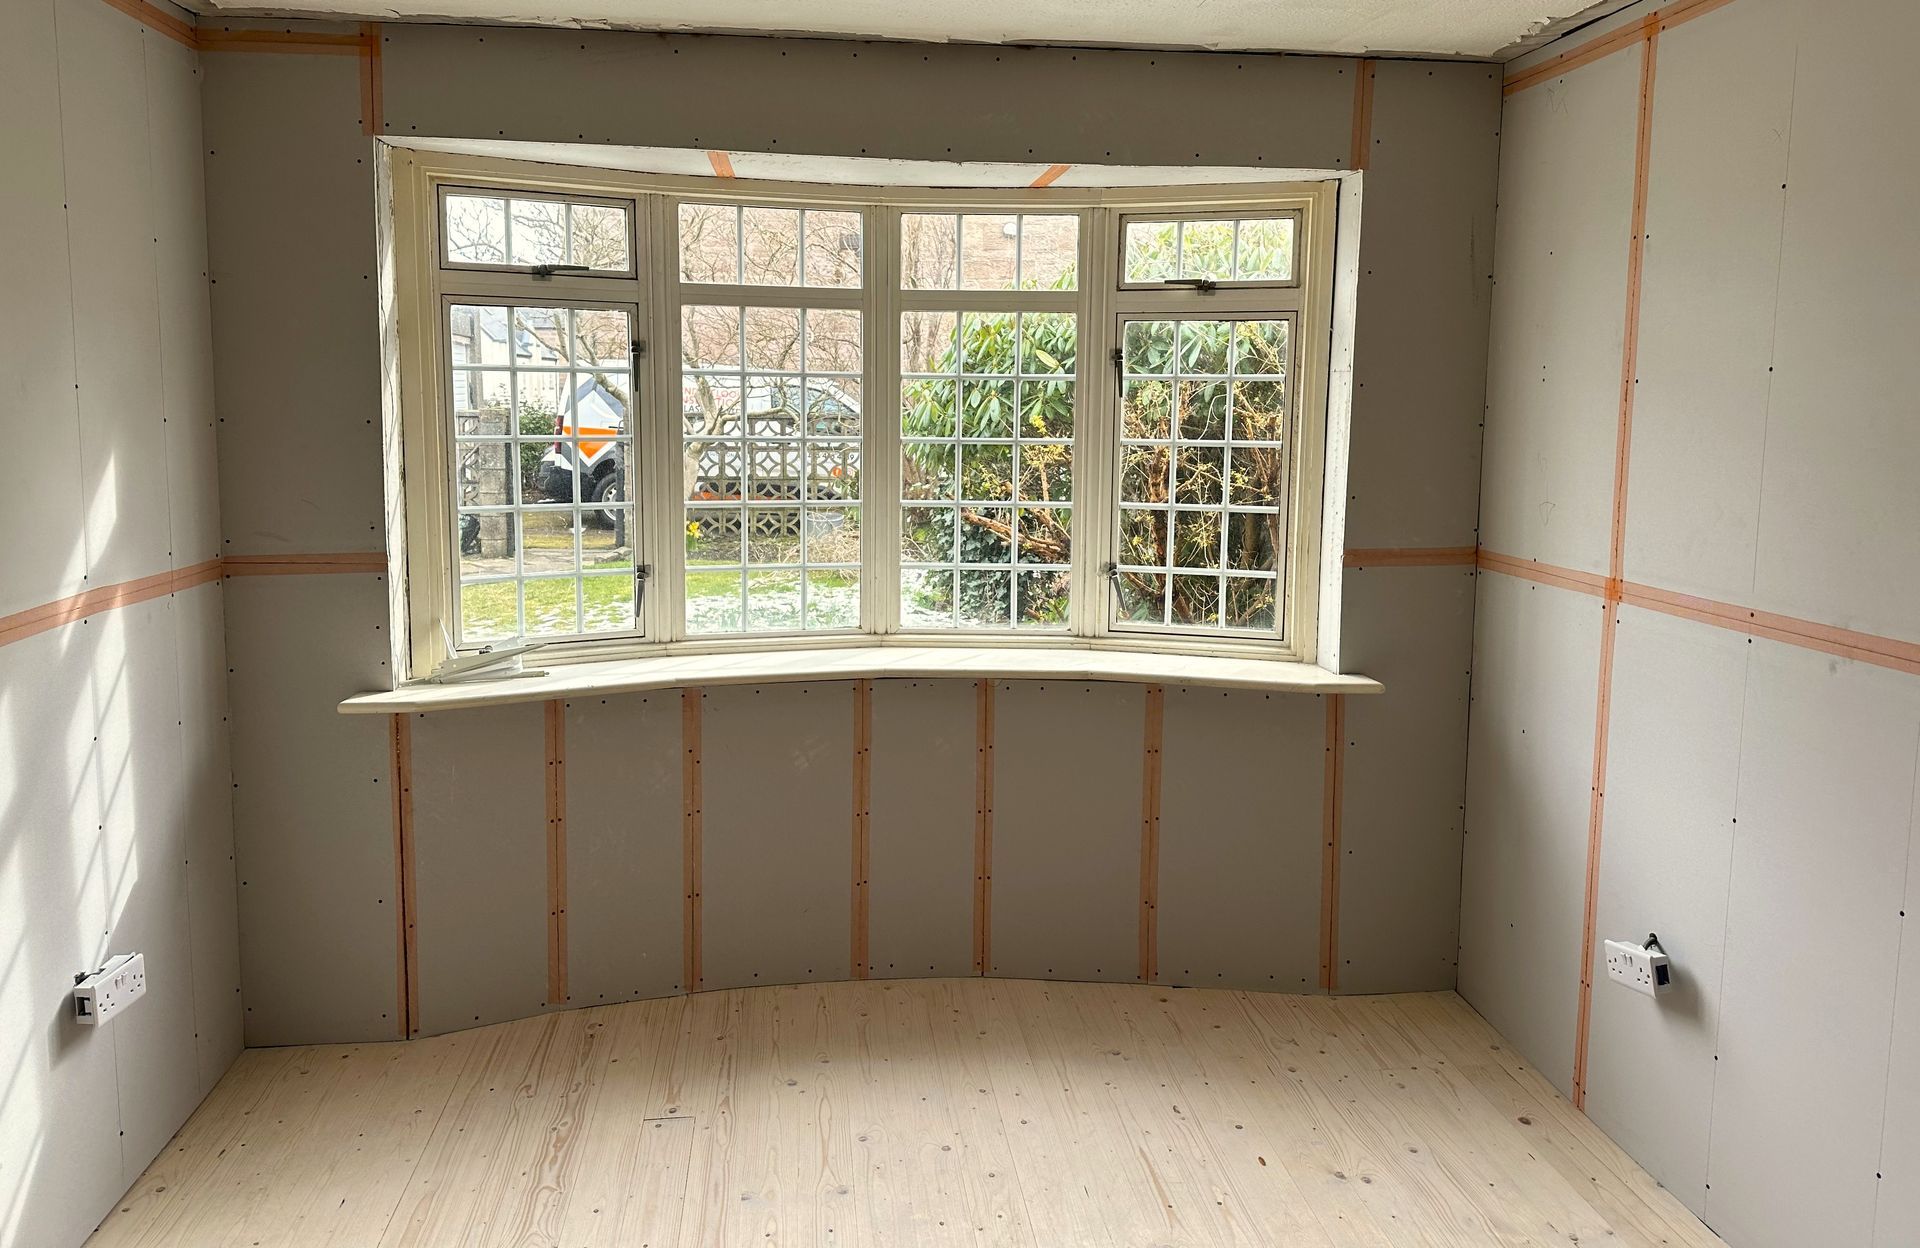 Over-boarded Internal Wall Insulation